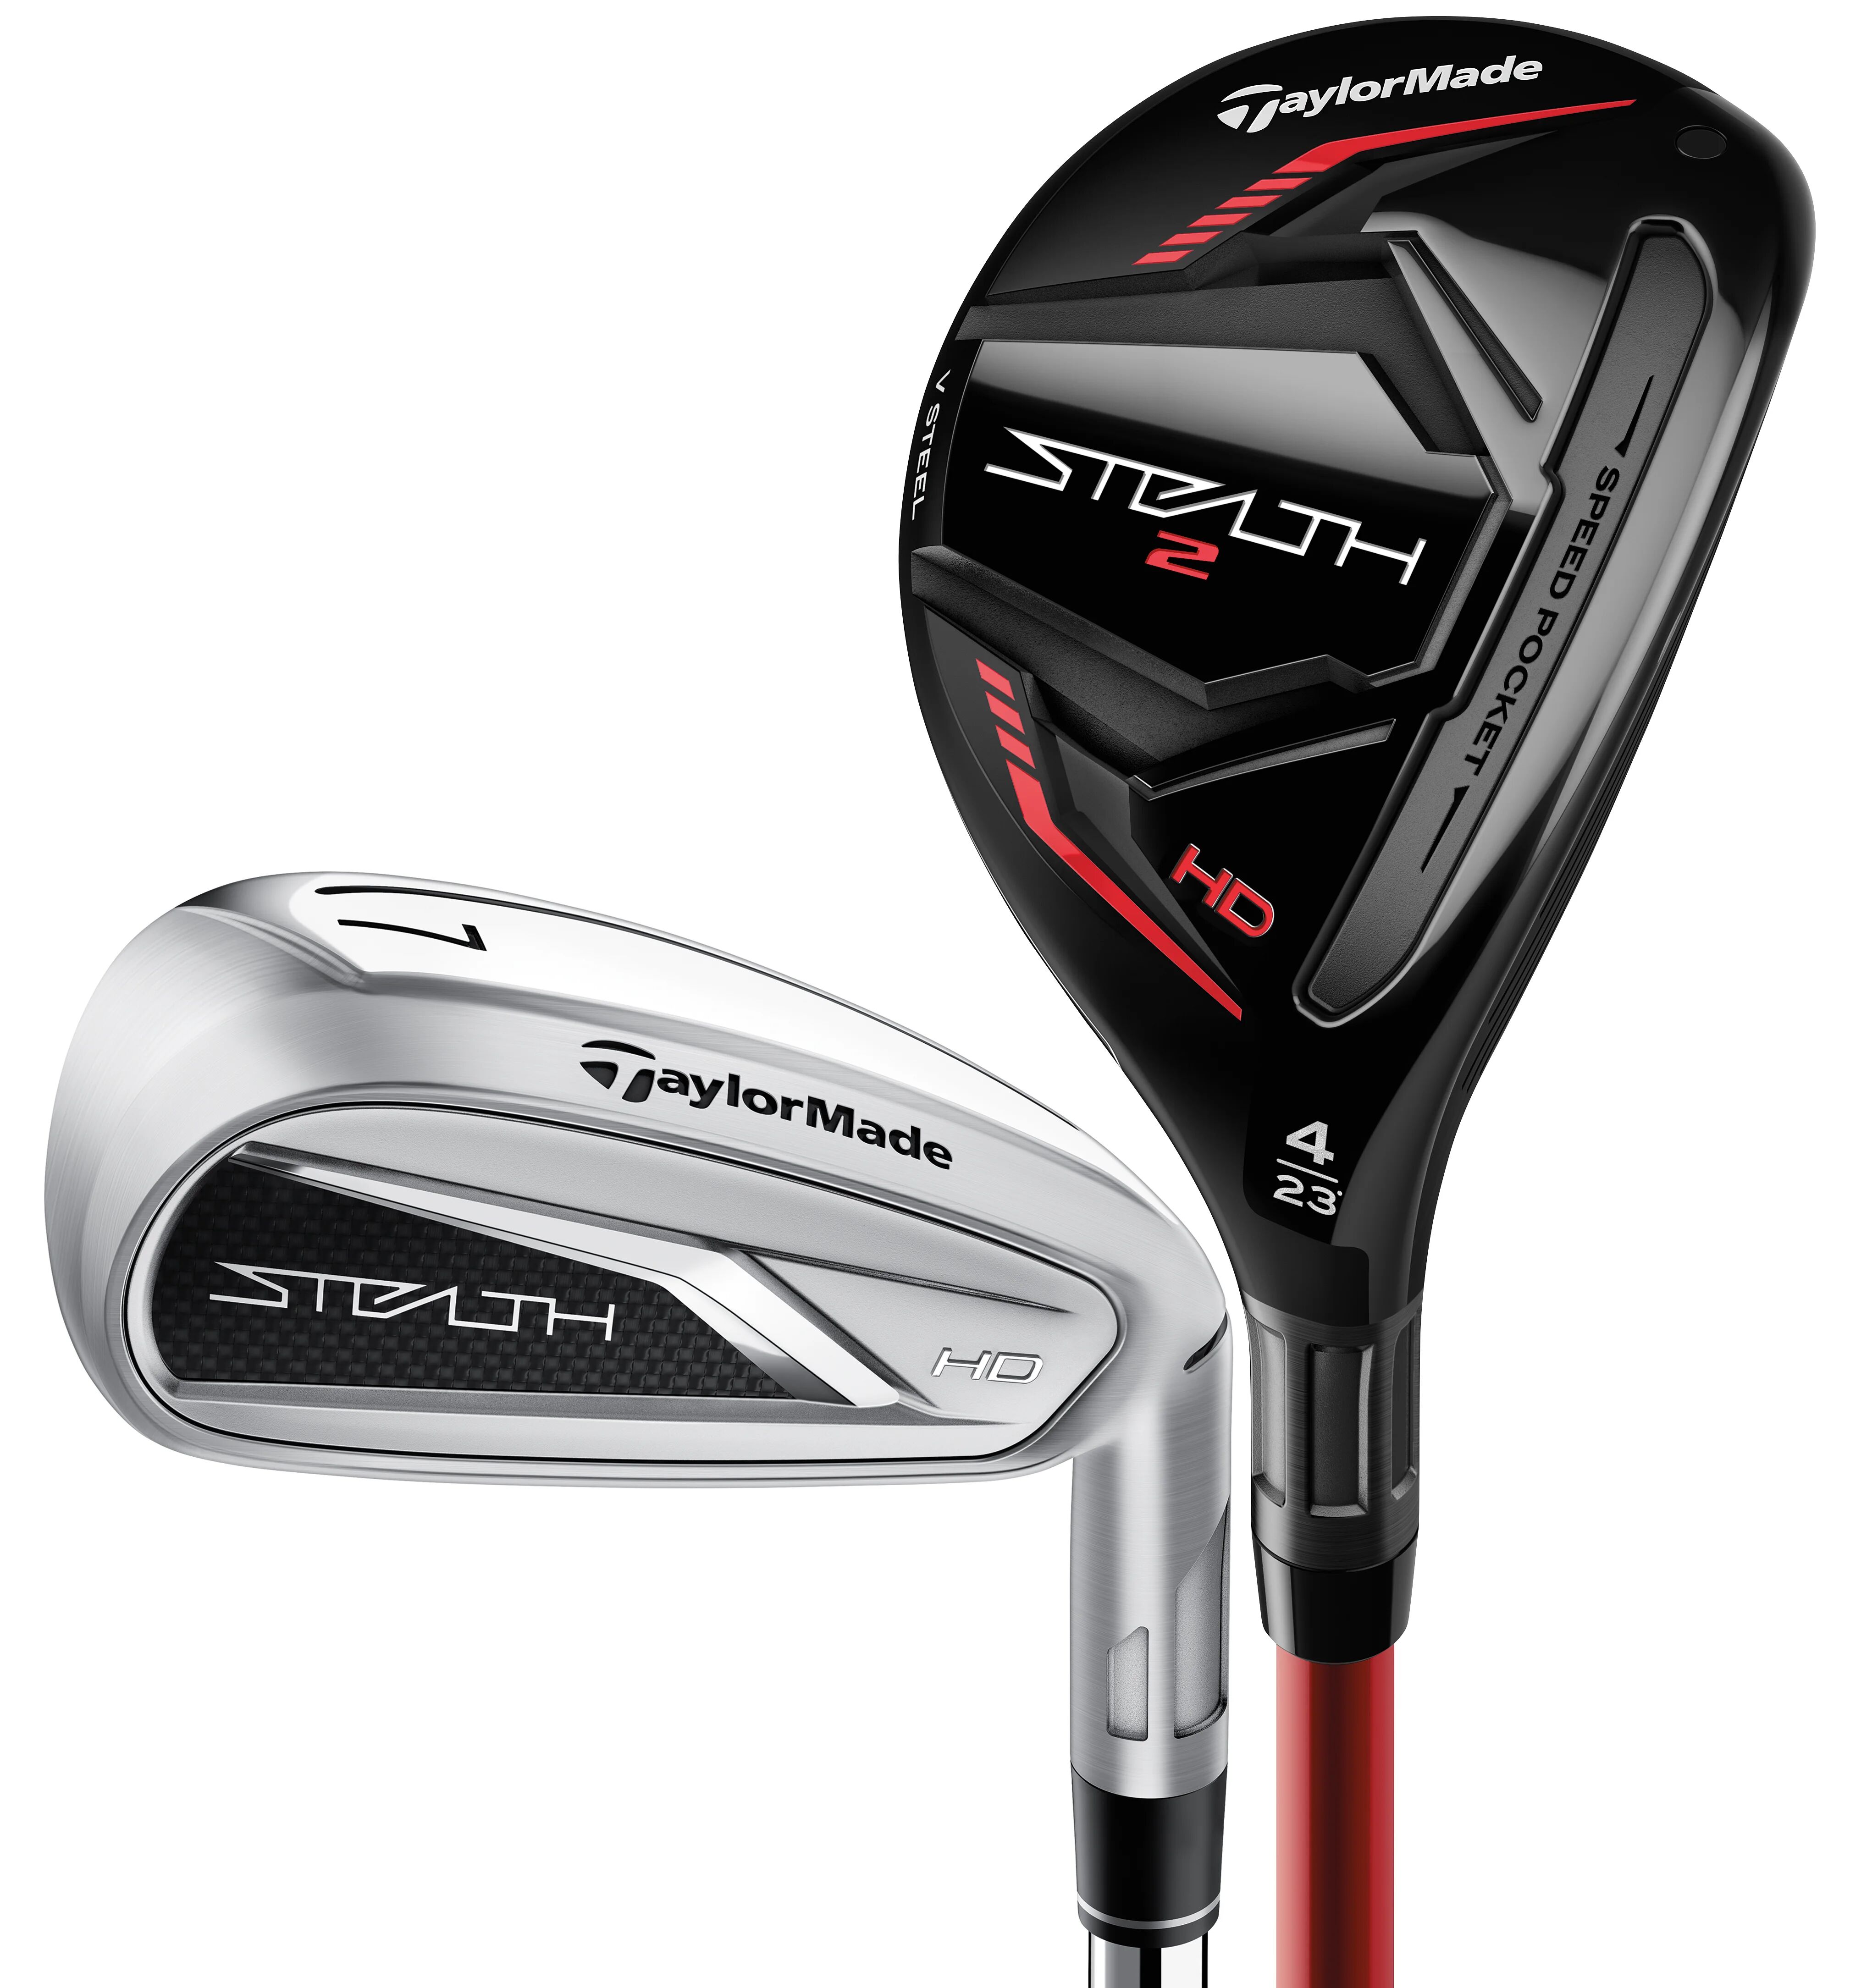 TaylorMade Stealth HD Hybrid Combo Iron Set - 3H,4H,5-PW - REGULAR - LEFT - Golf Clubs